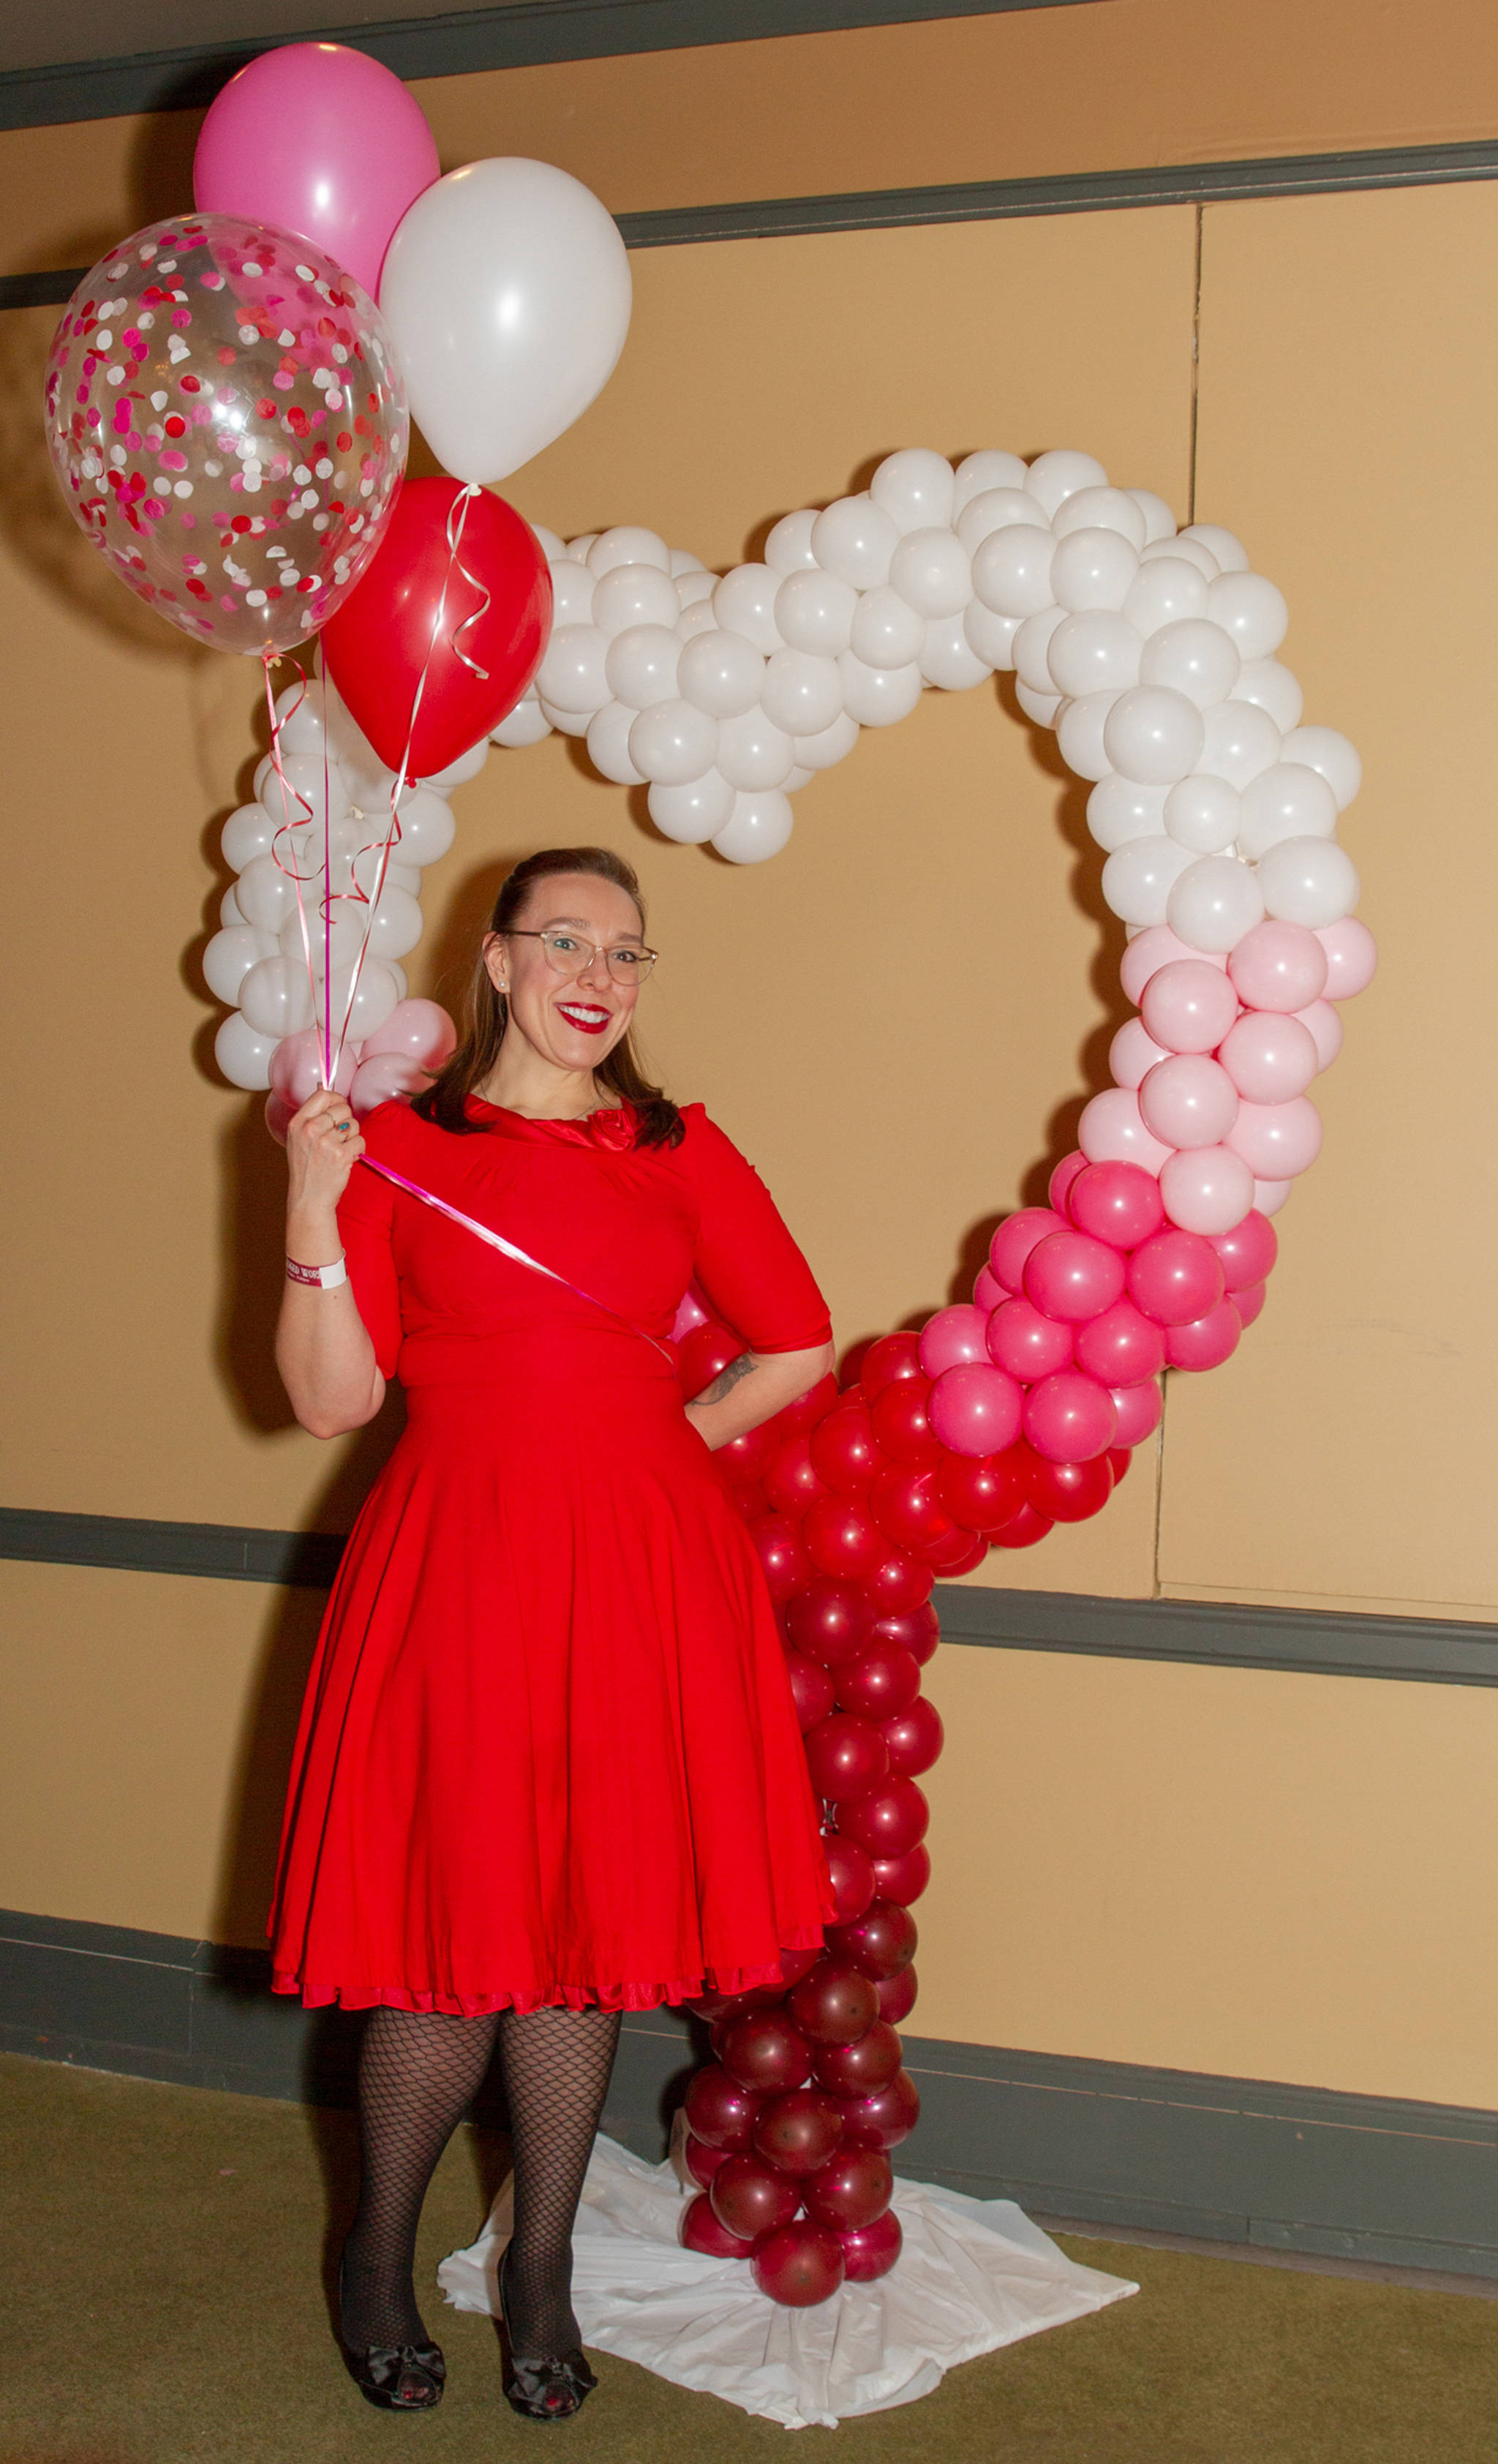 Feb. 17, 2019: Amy Paige knows that vintage fashion is always in style! For a recent night on the town, at a fundraising event for Juneau Animal Rescue, she wore “the perfect red dress” — a bright 1950s style swing dress with crinoline slips underneath. Simply add black fishnet stockings and heels from Shoefly, and red lipstick, and she was good to go!